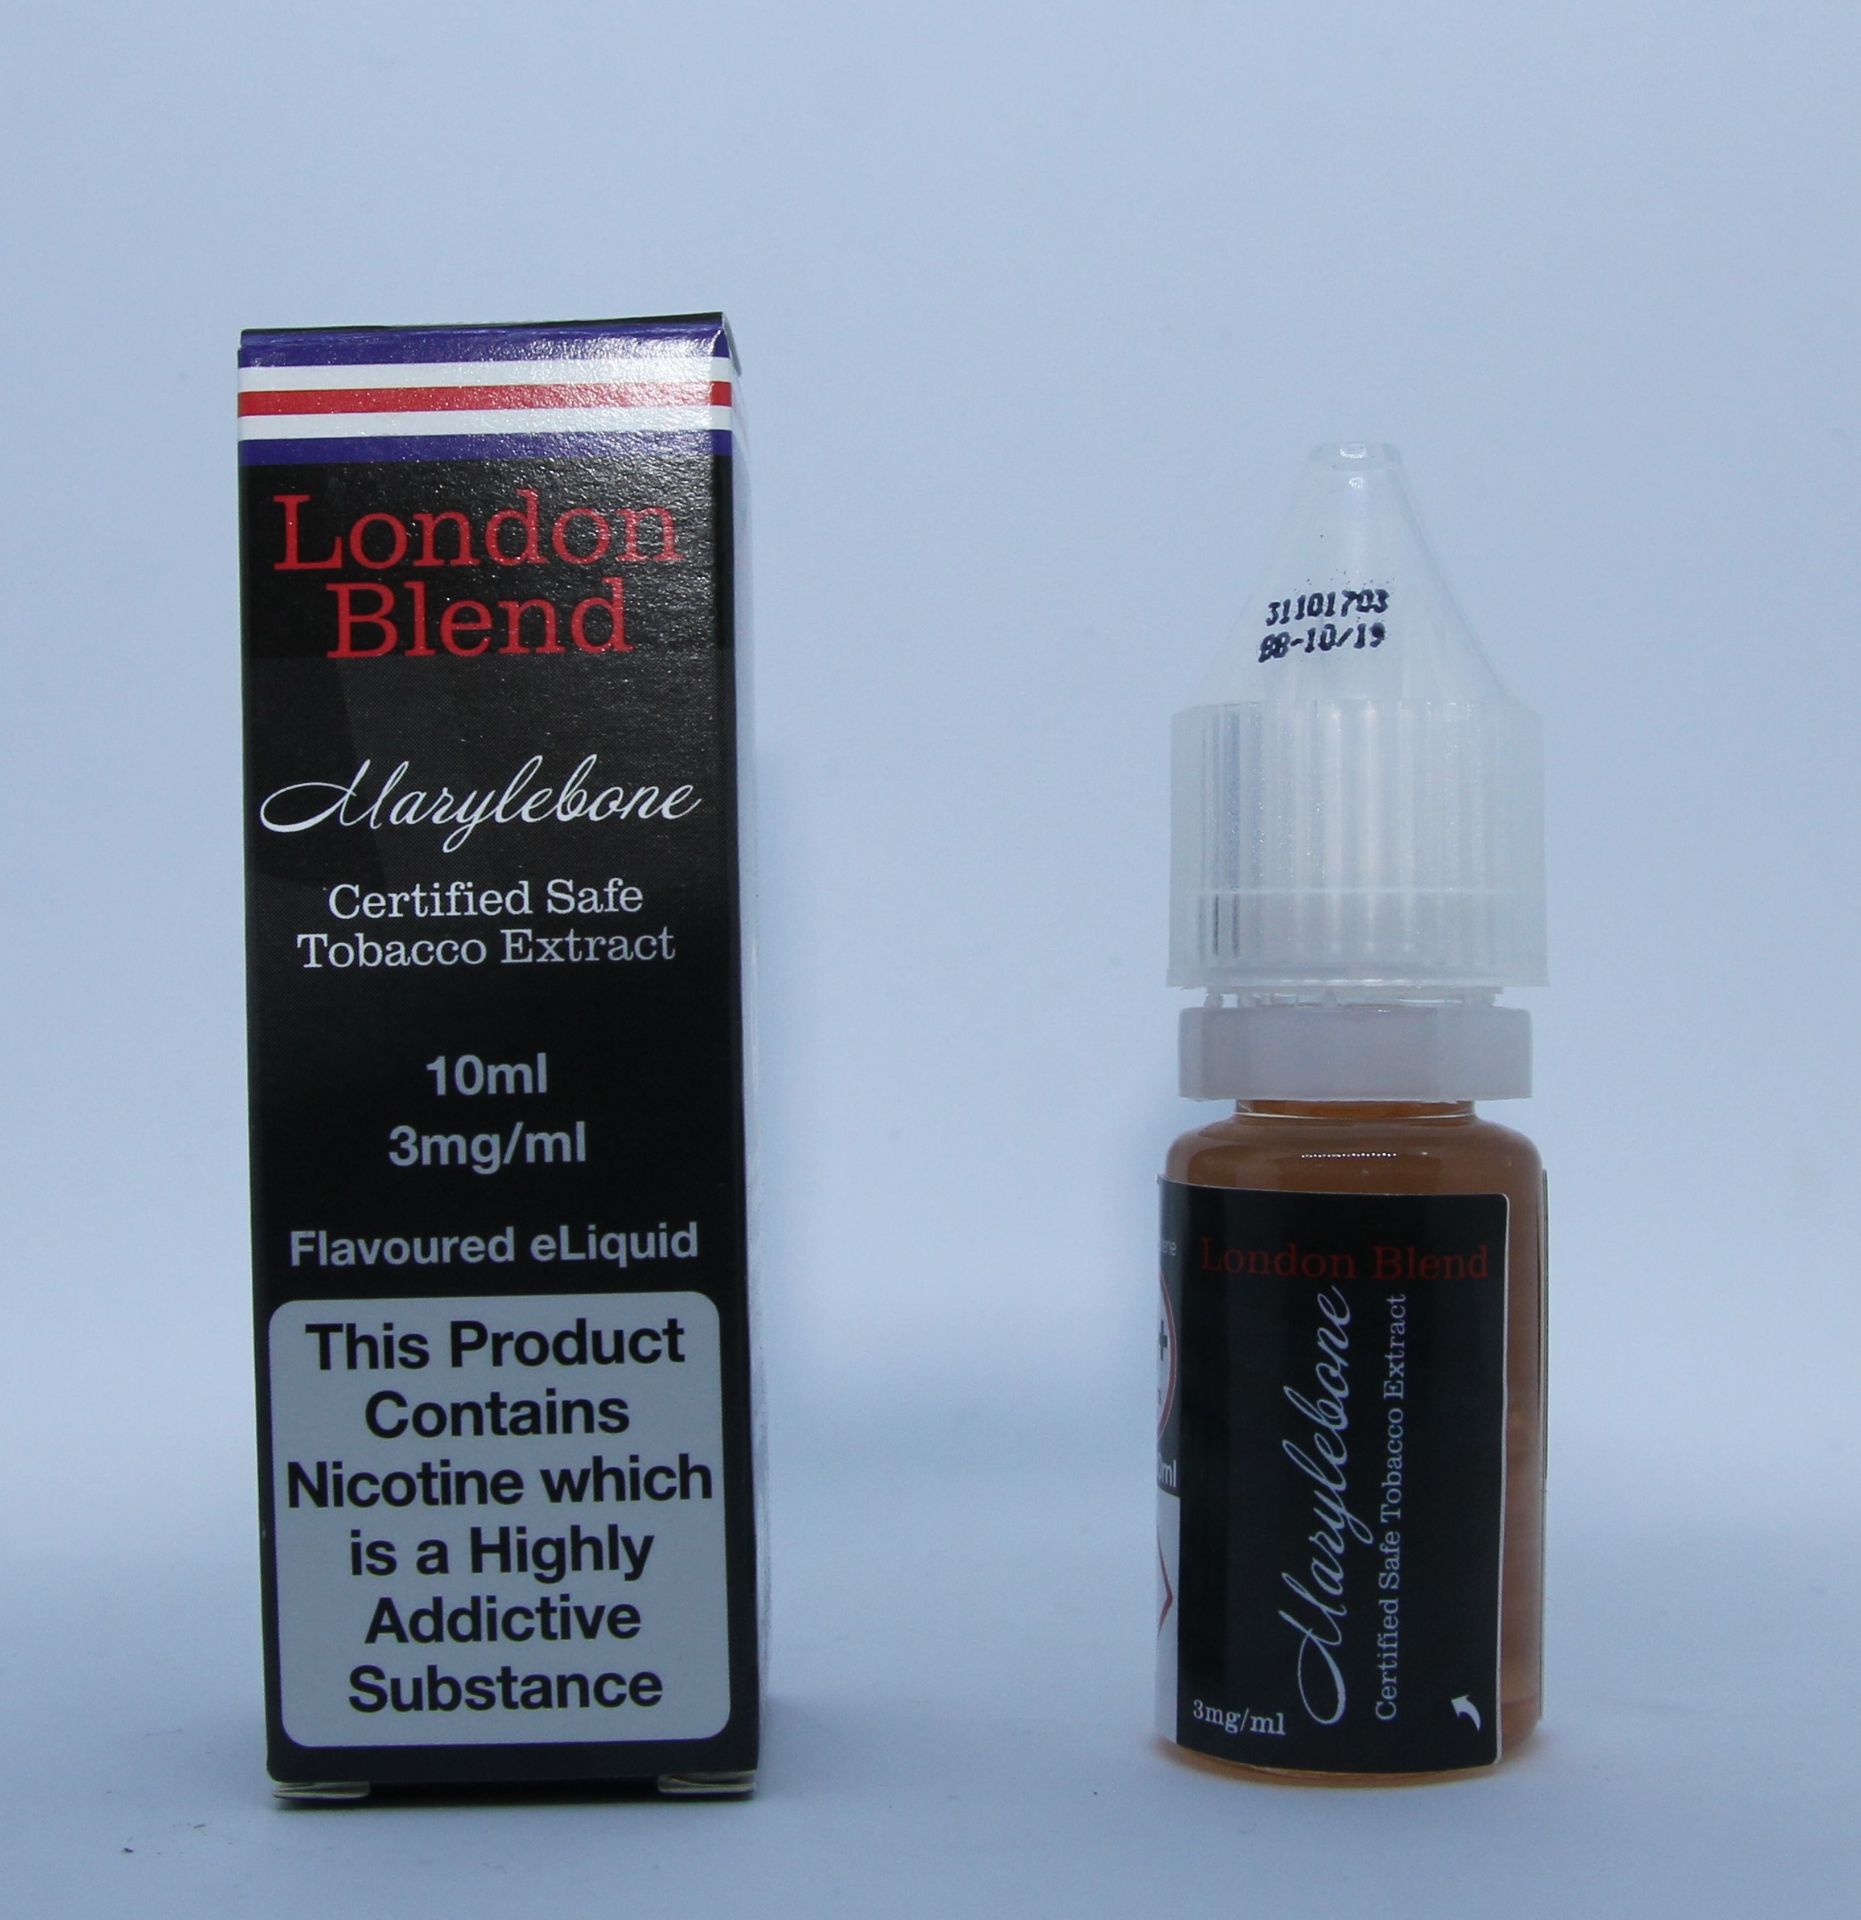 480 x Bottles of London Blend Flavoured E-Liquid 10ml Marylebone 6mg Nicotine, Products have surpass